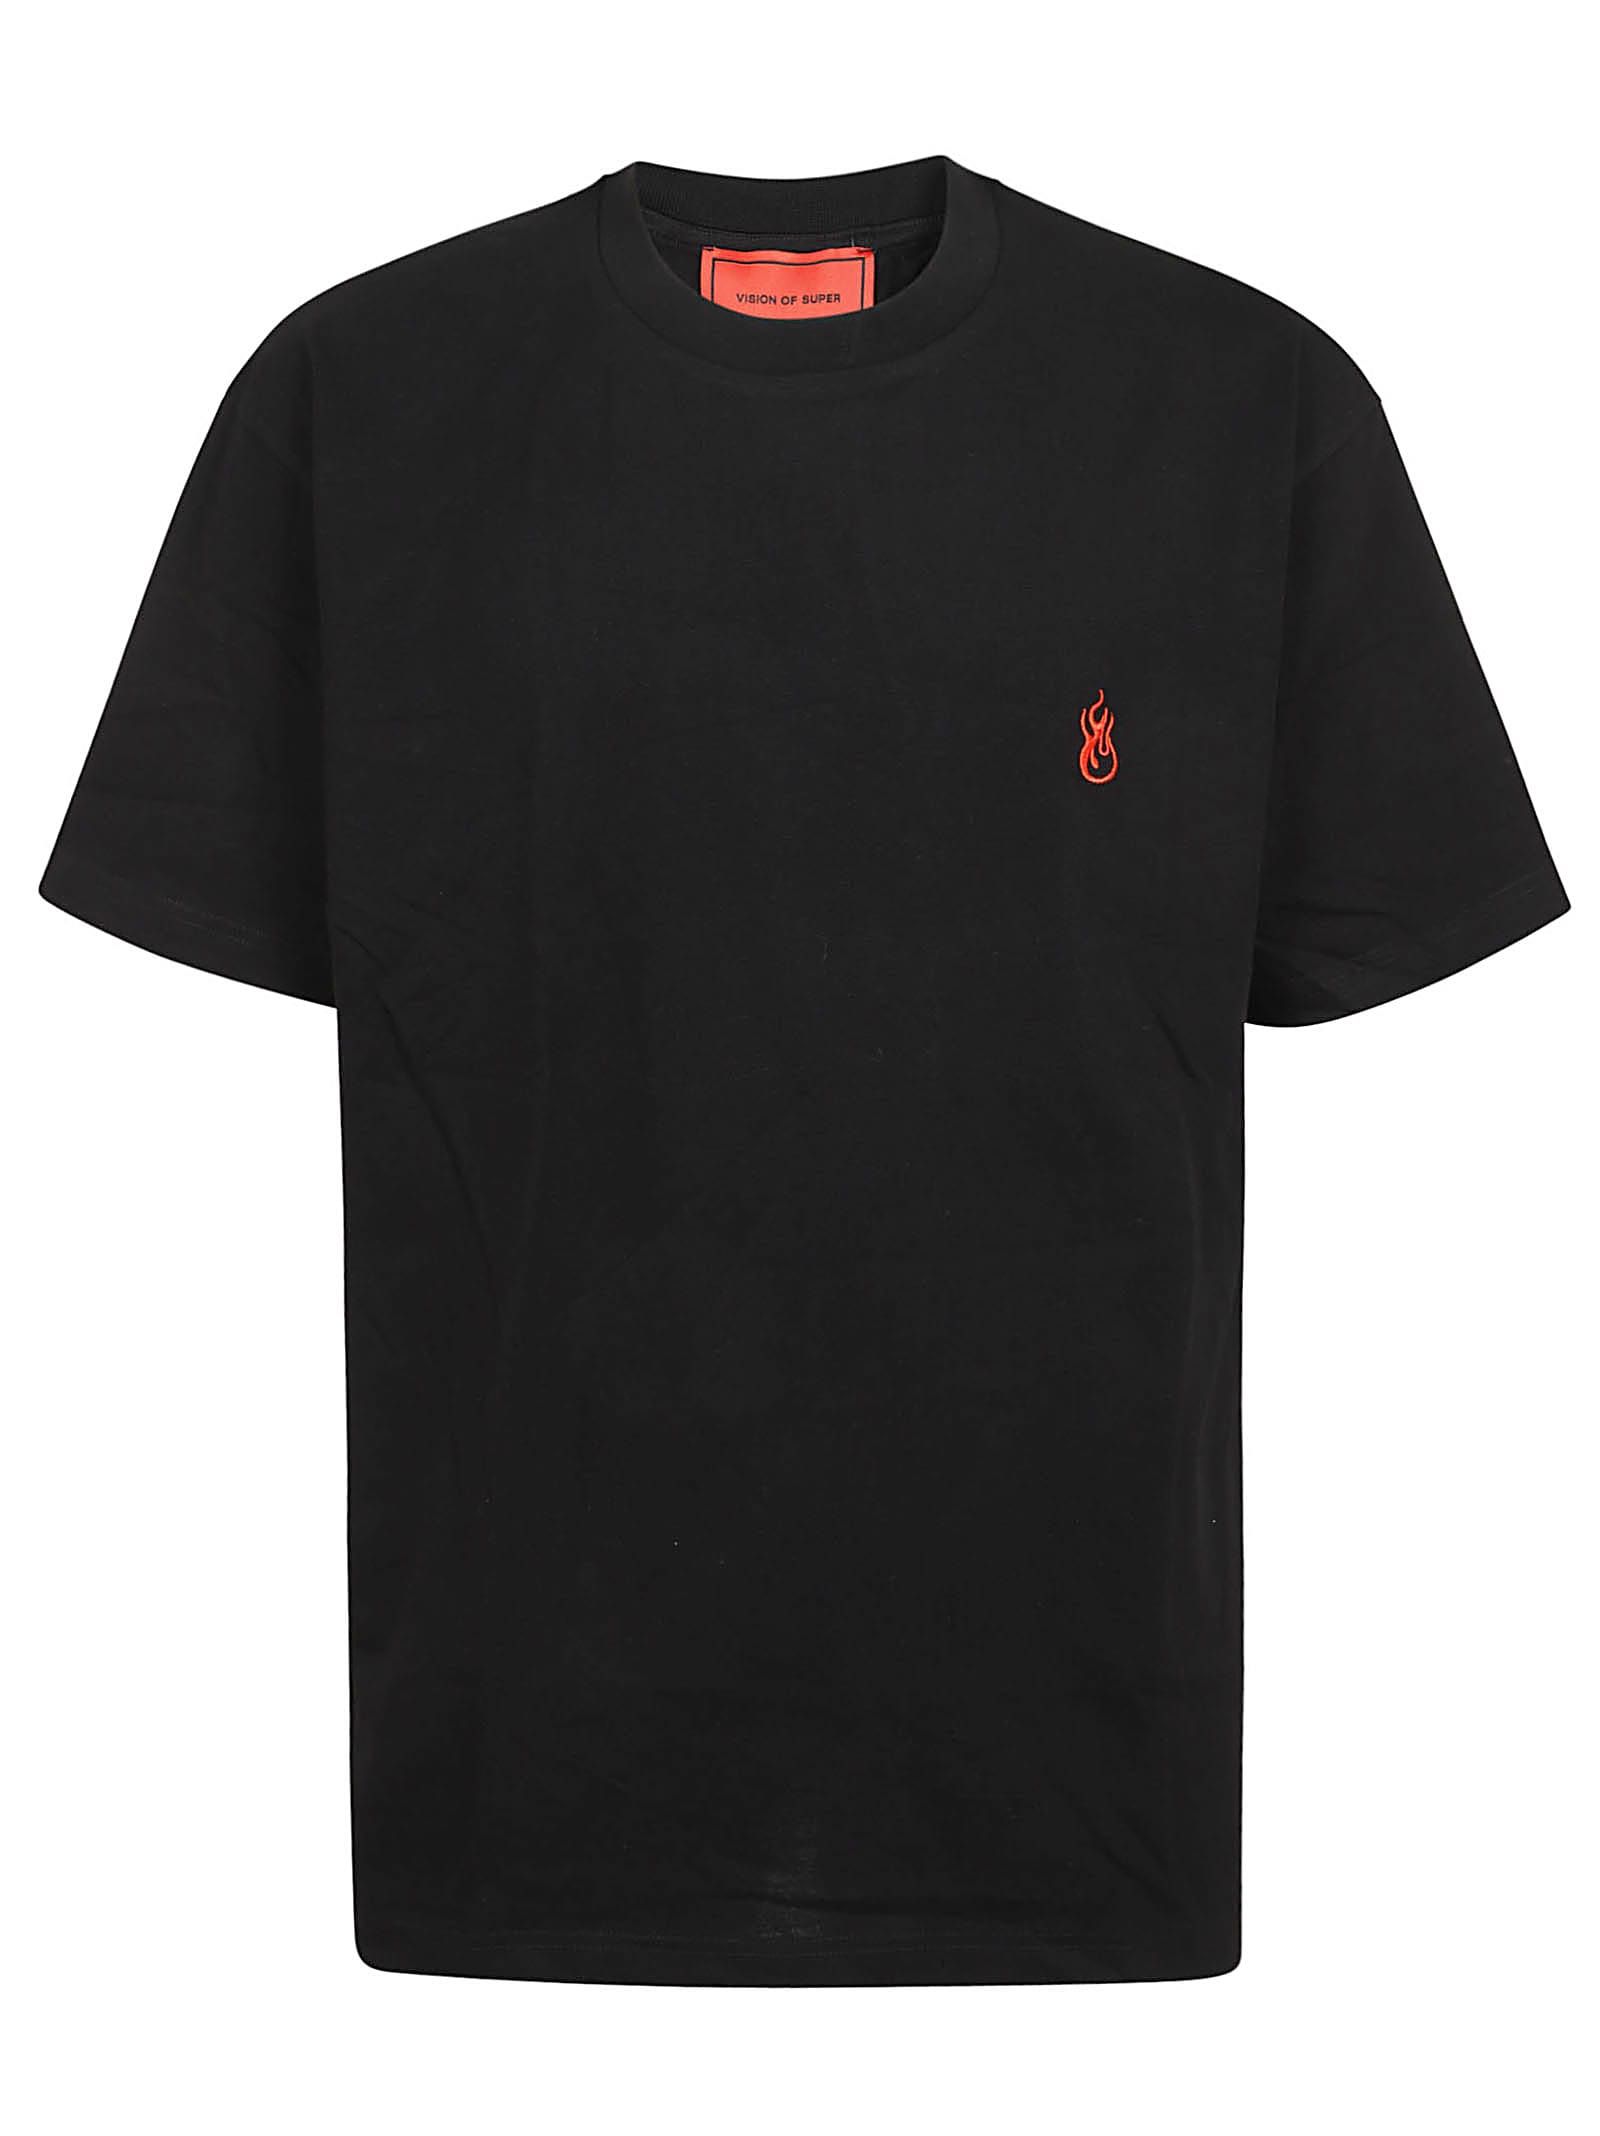 Black T-shirt With Flames Logo And Metal Label